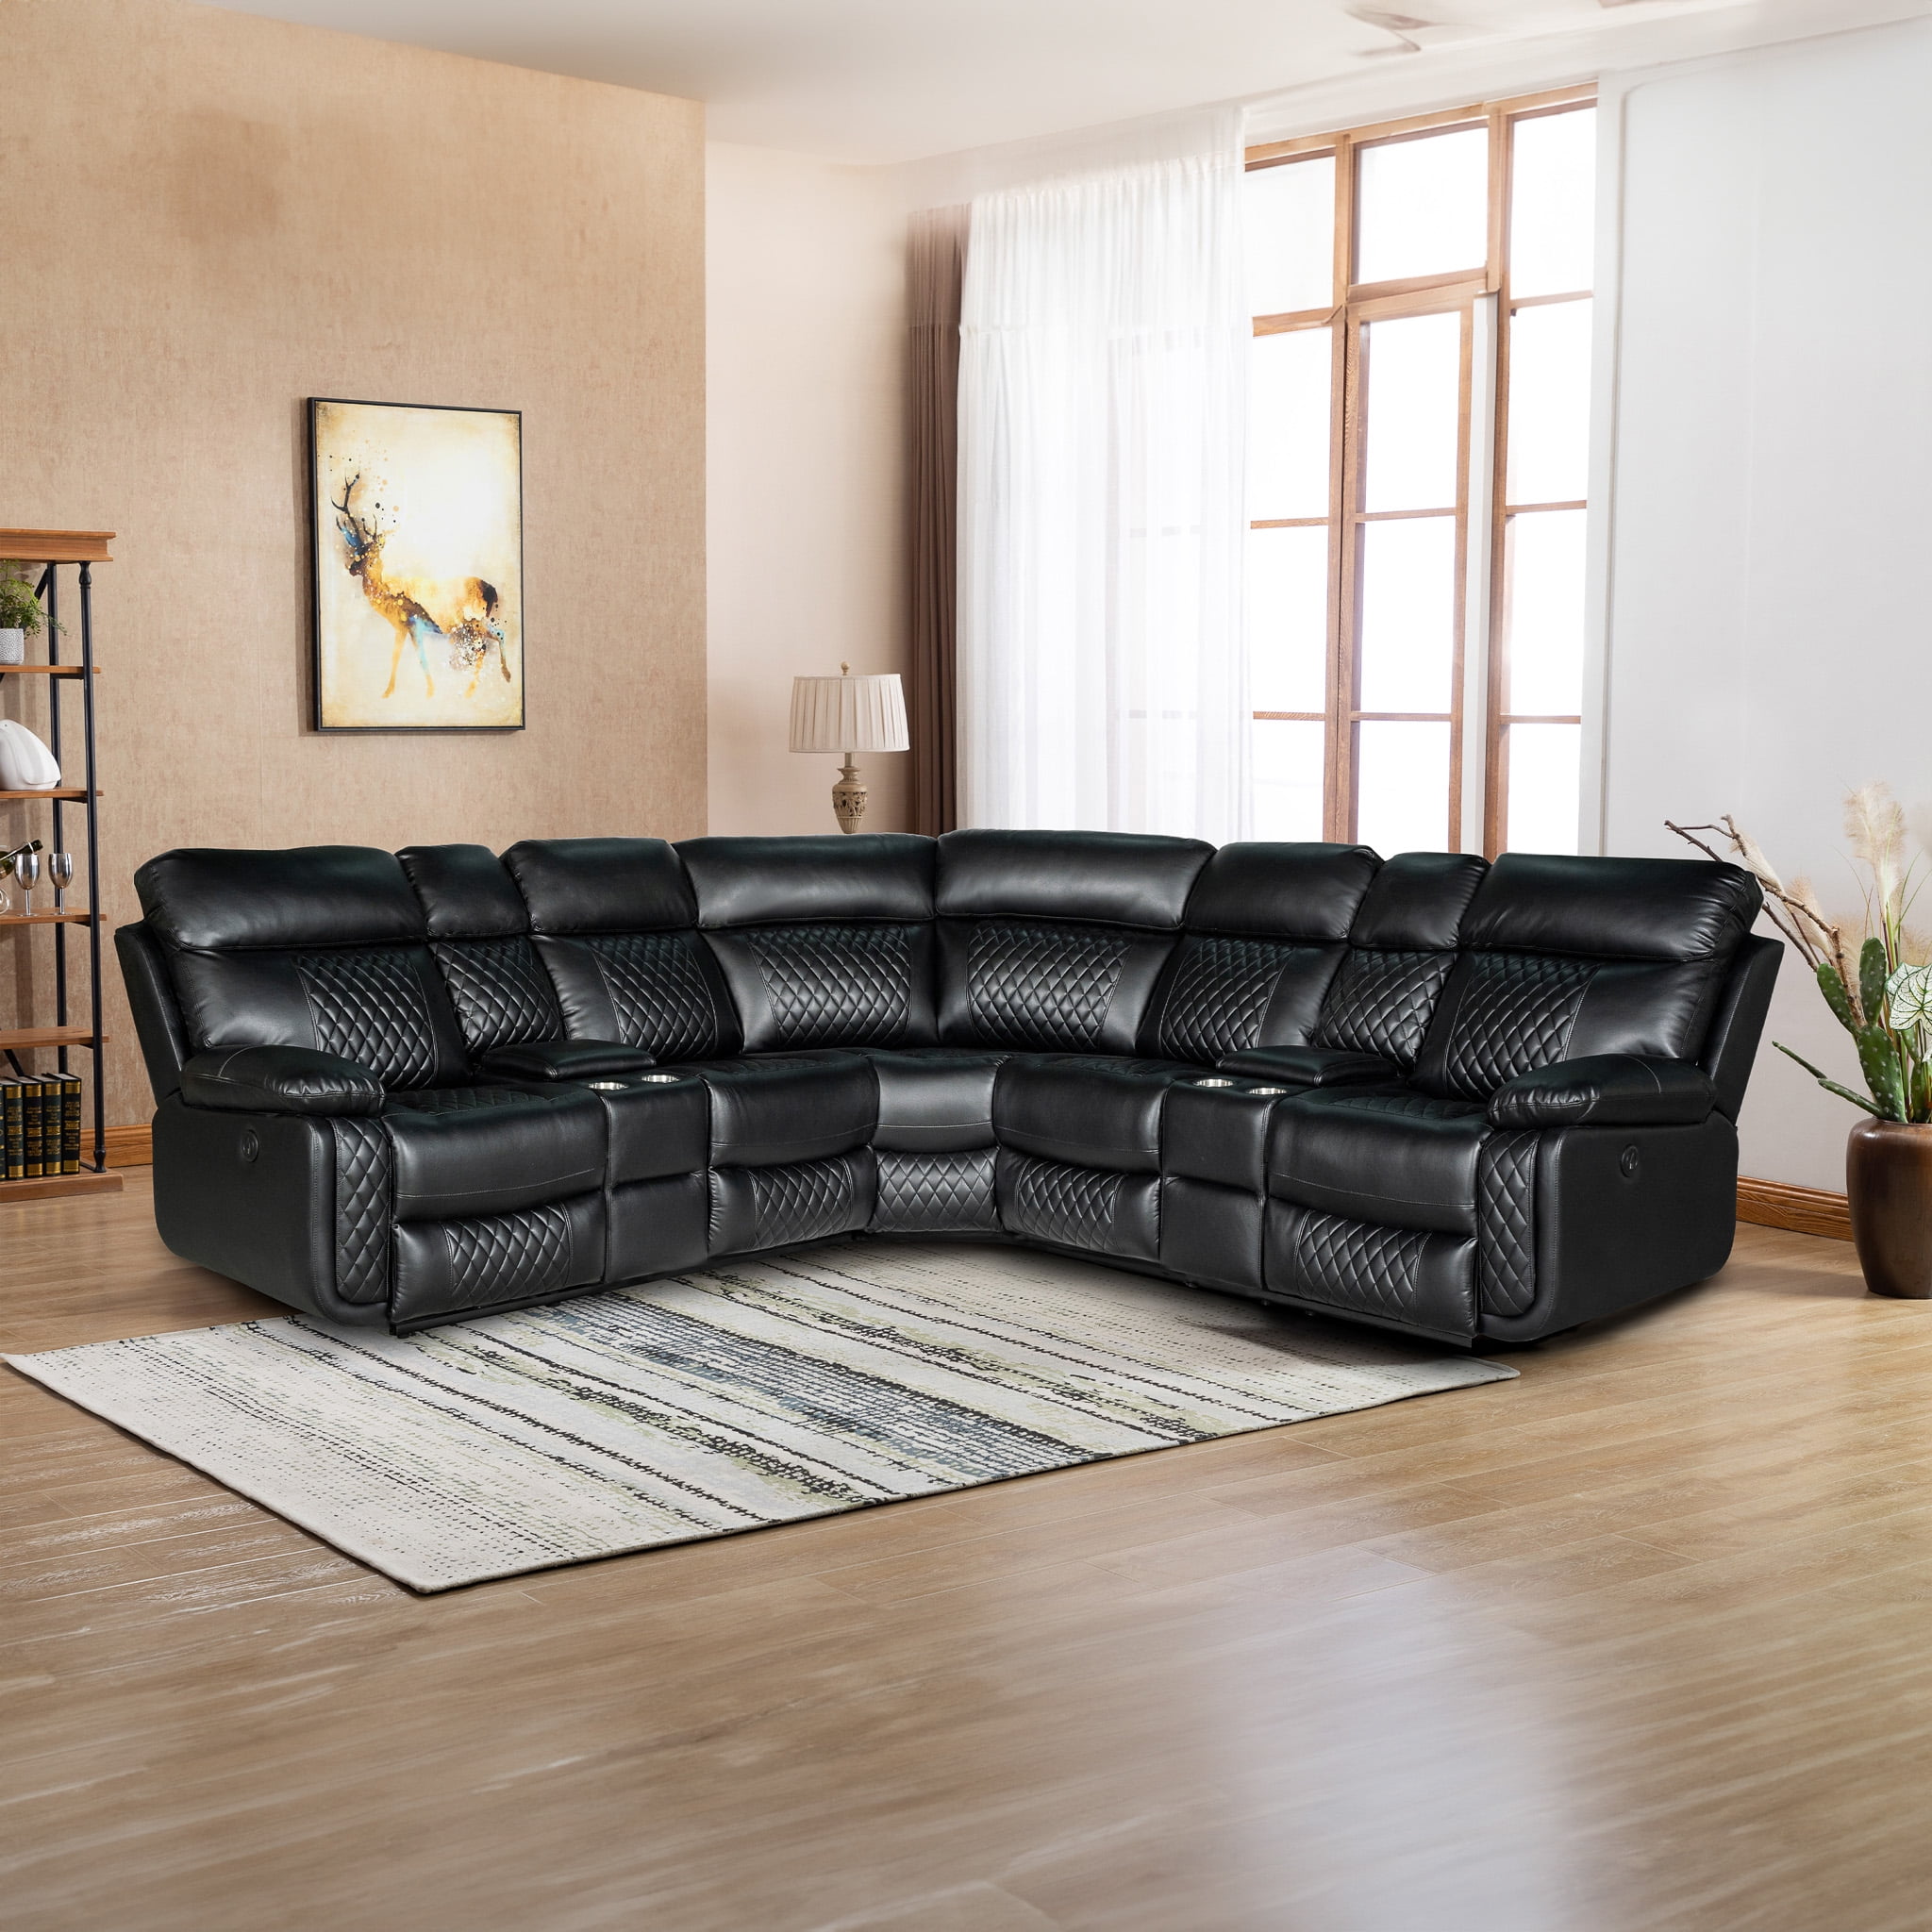 Living Room Reclining Sectional Brown